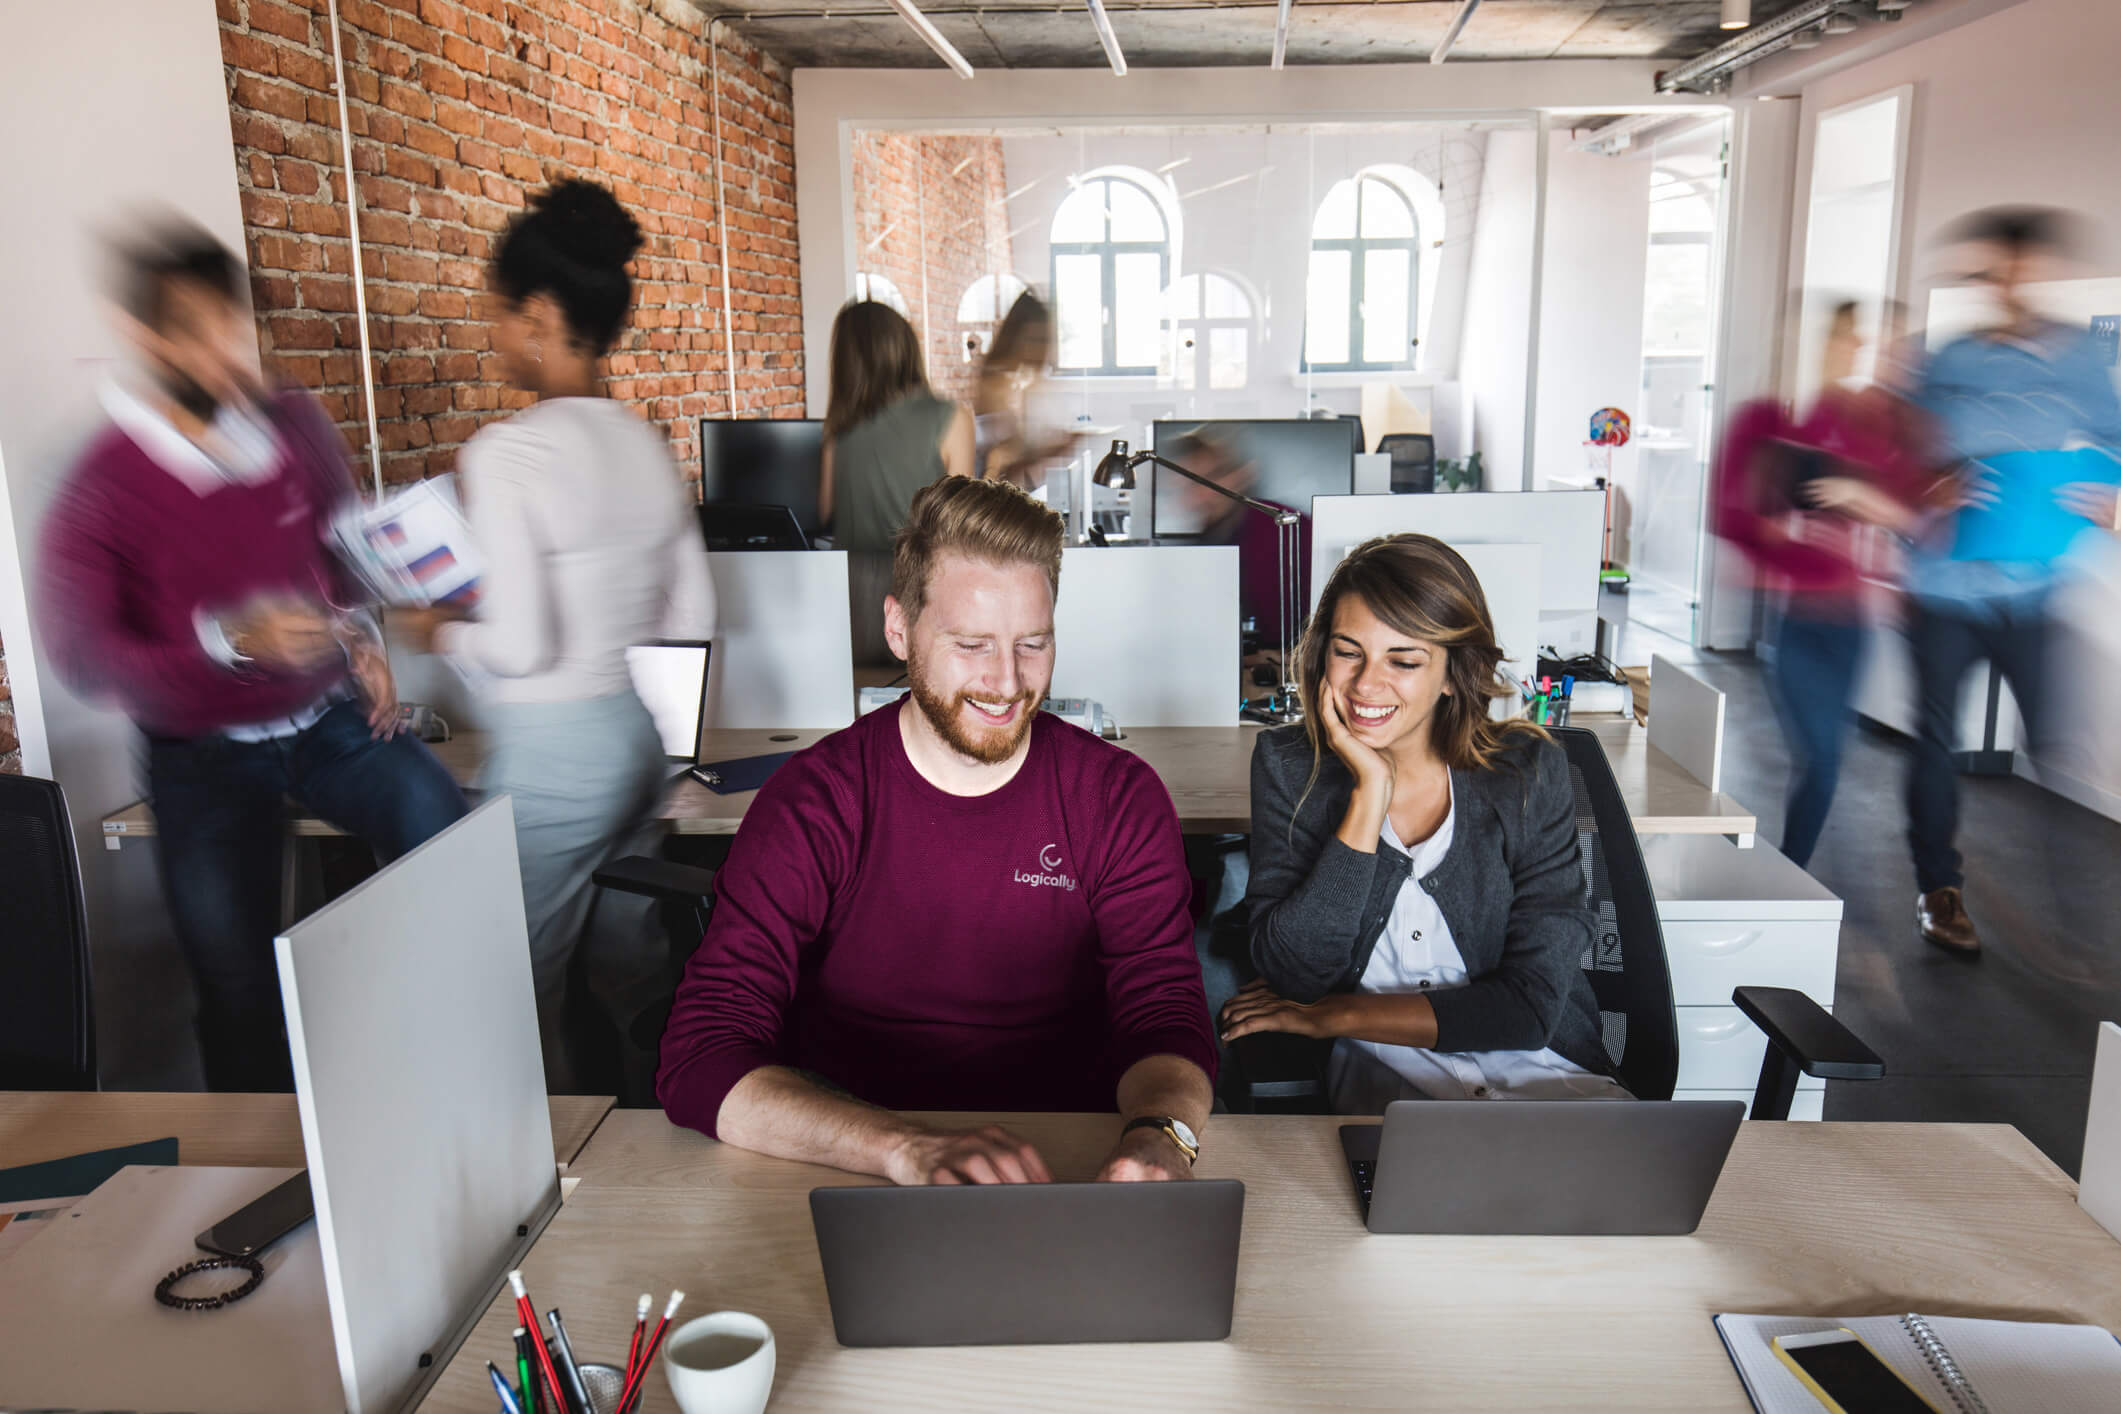 Man and woman smiling working at an office while their coworkers look blurry